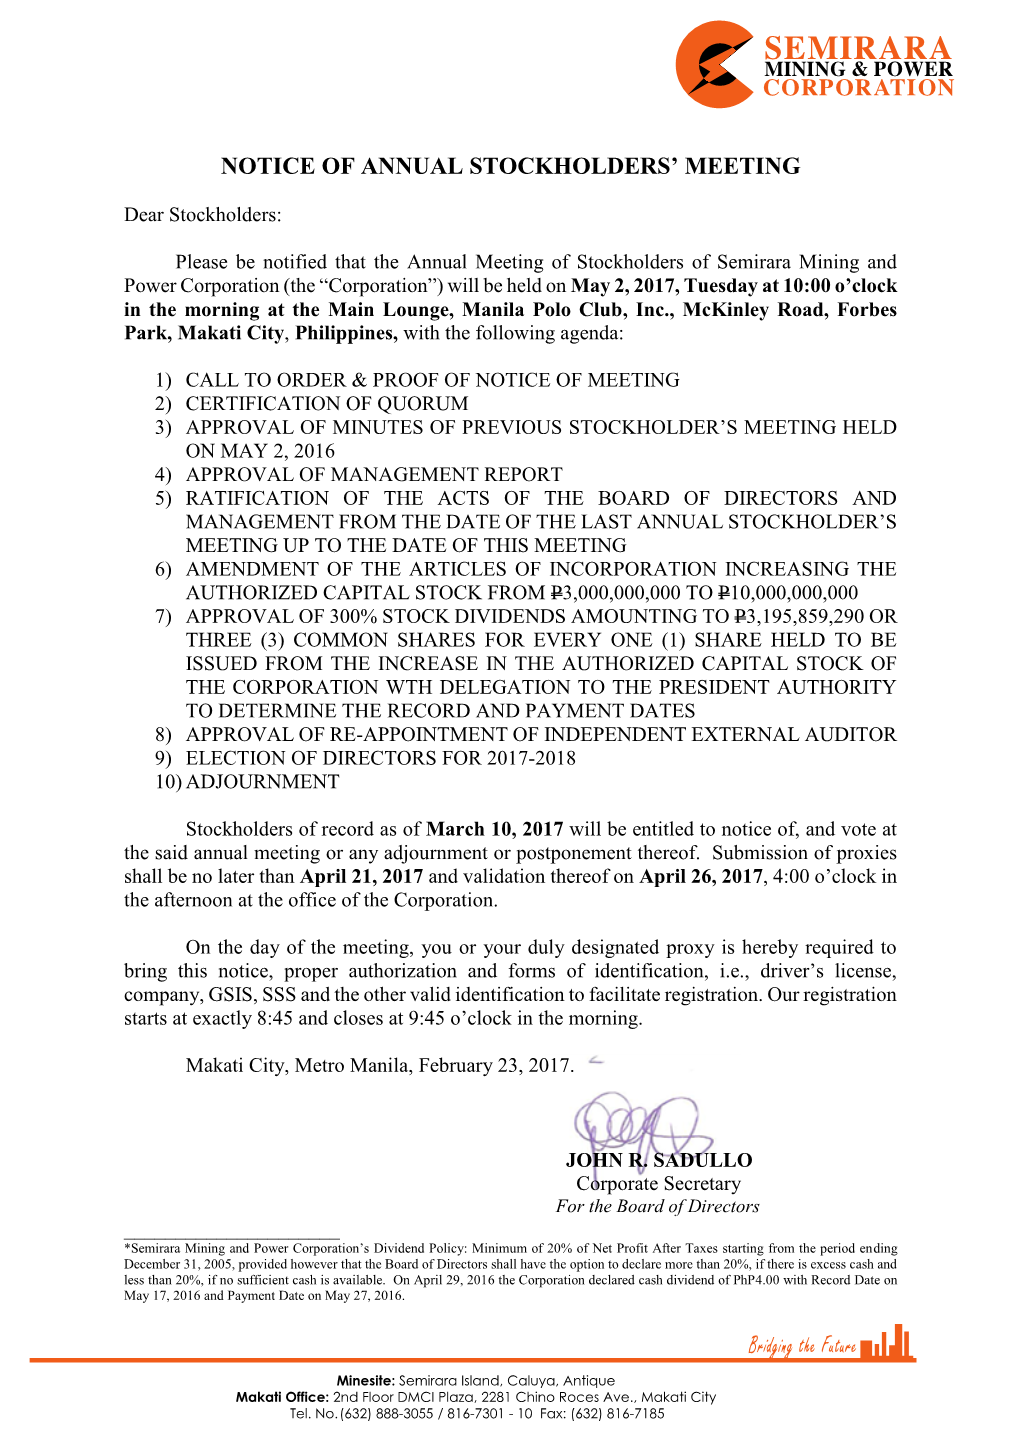 Notice of Annual Stockholders' Meeting